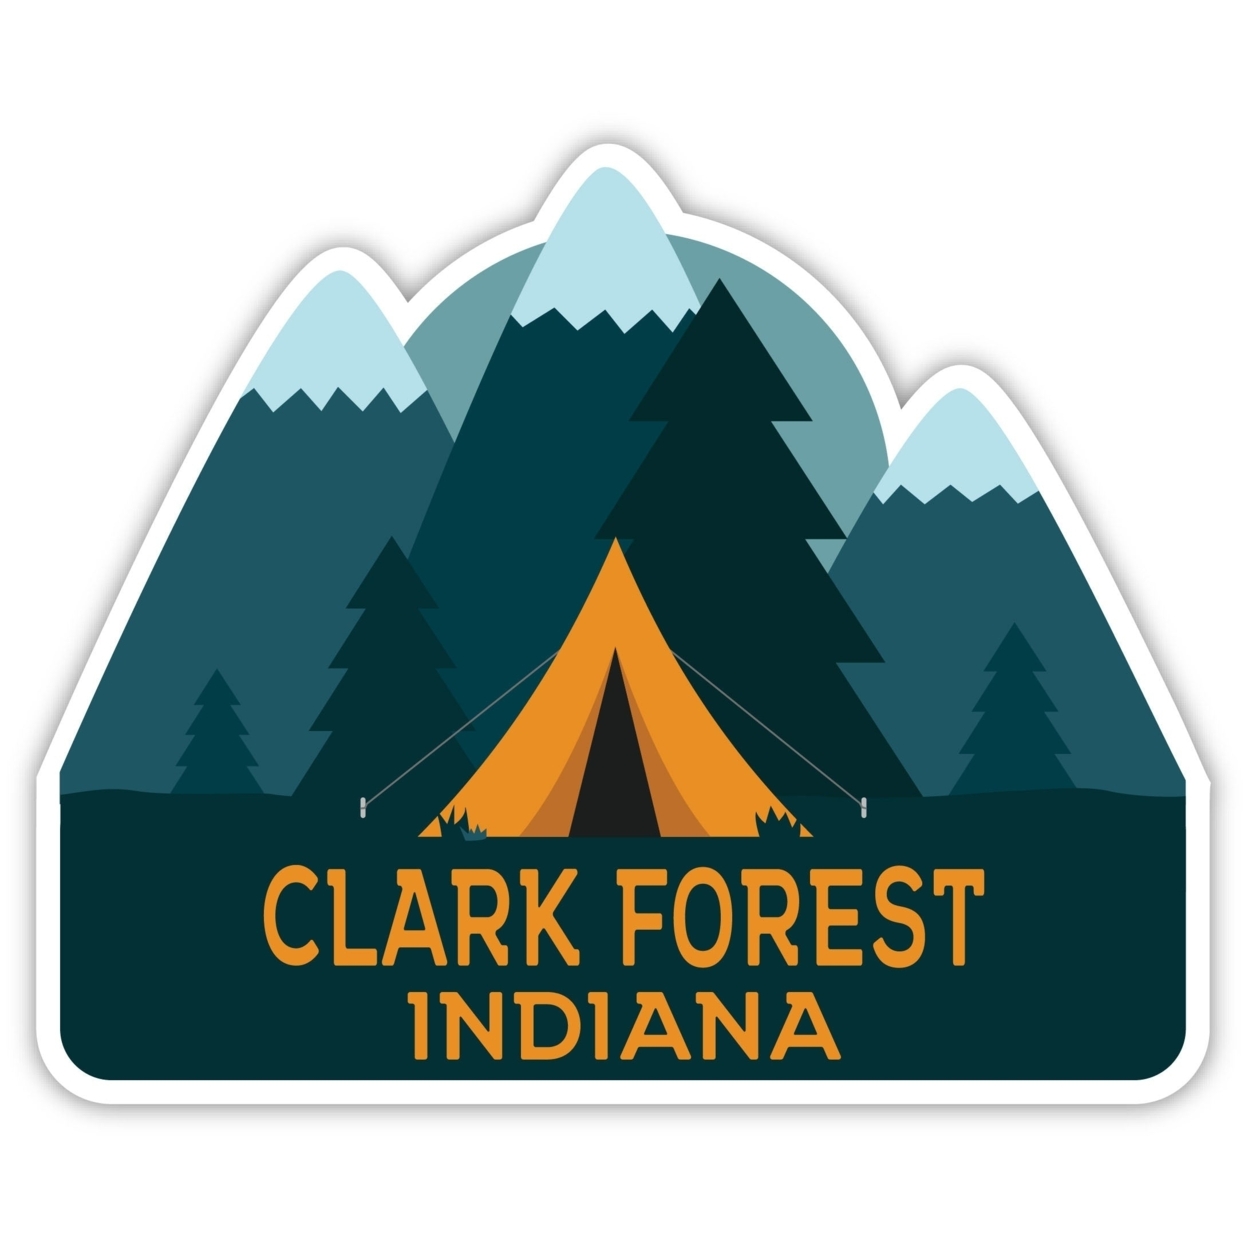 Clark Forest Indiana Souvenir Decorative Stickers (Choose Theme And Size) - 4-Pack, 2-Inch, Tent